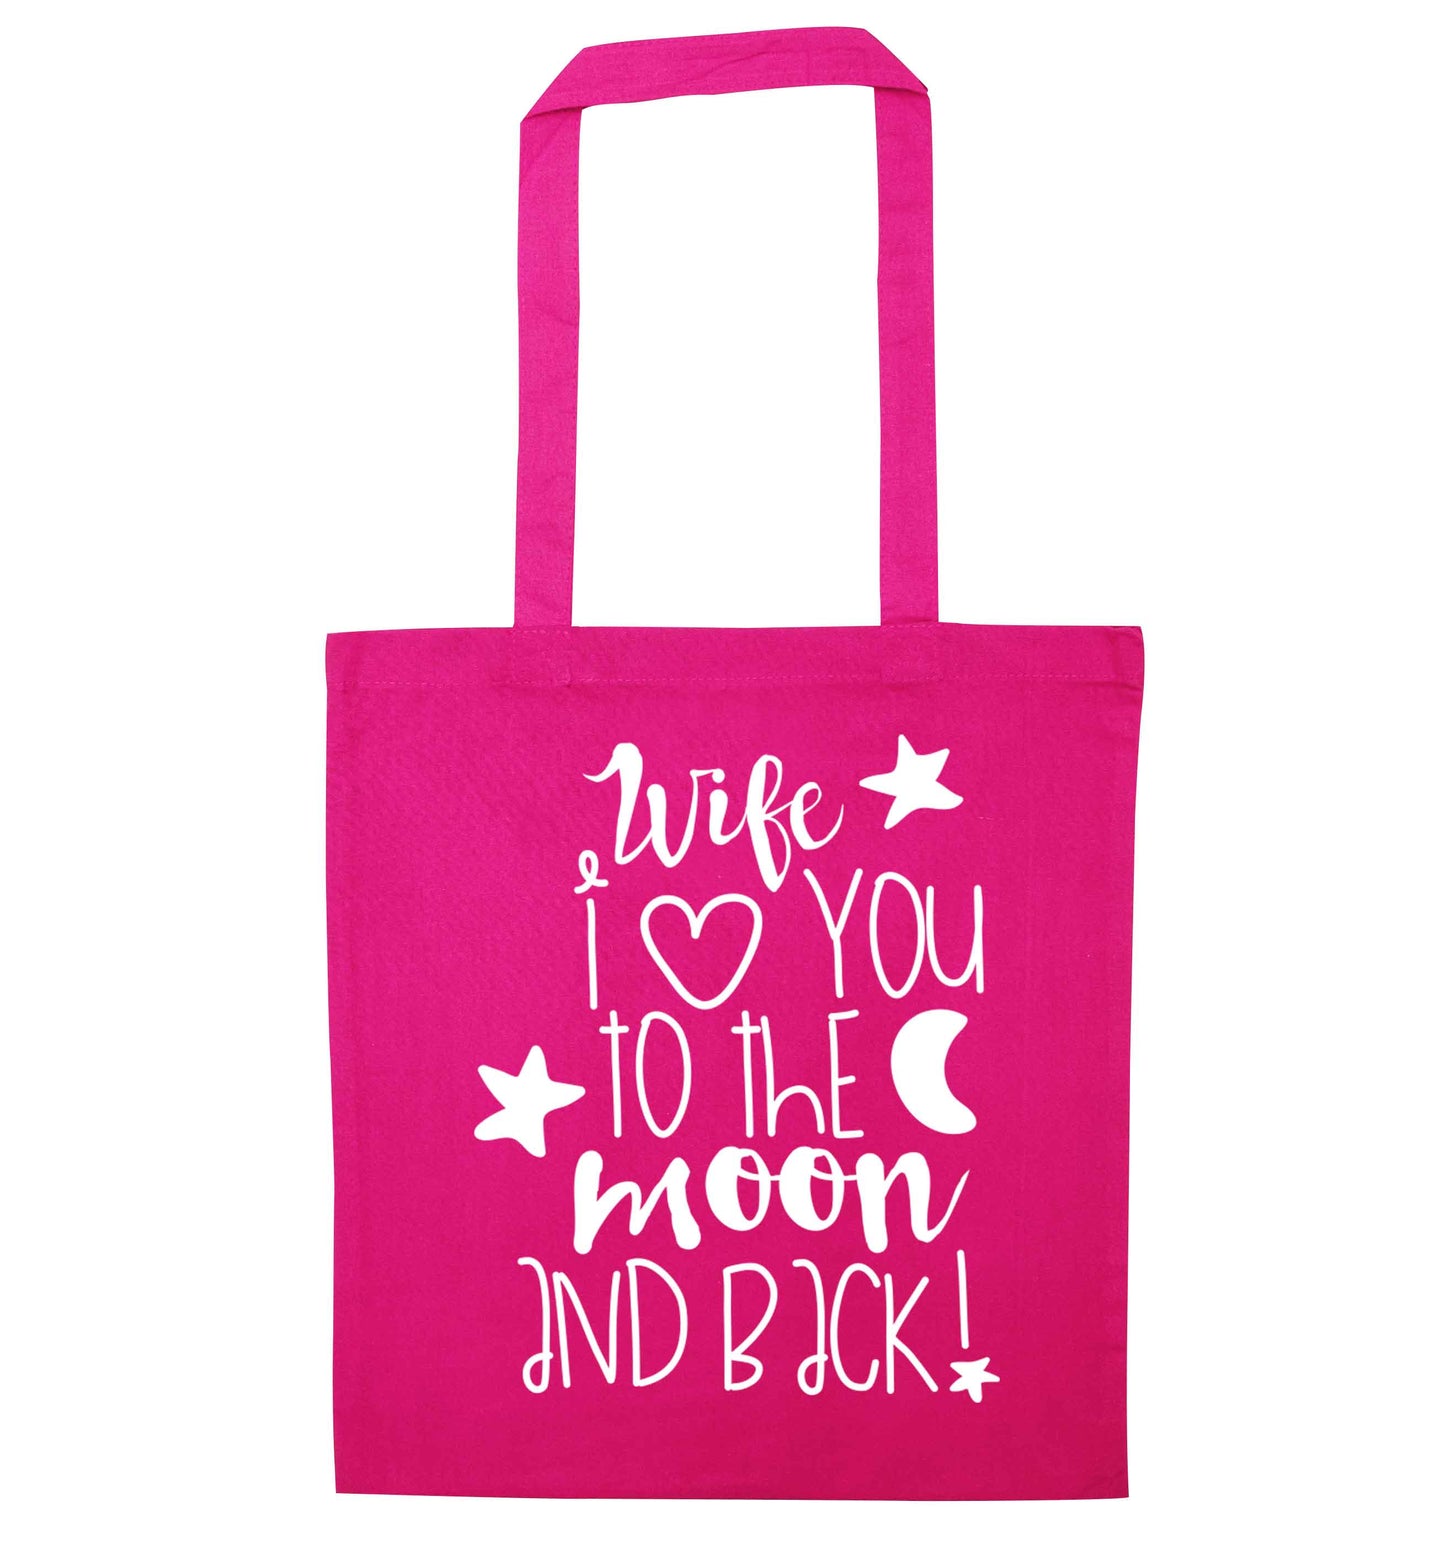 Wife I love you to the moon and back pink tote bag